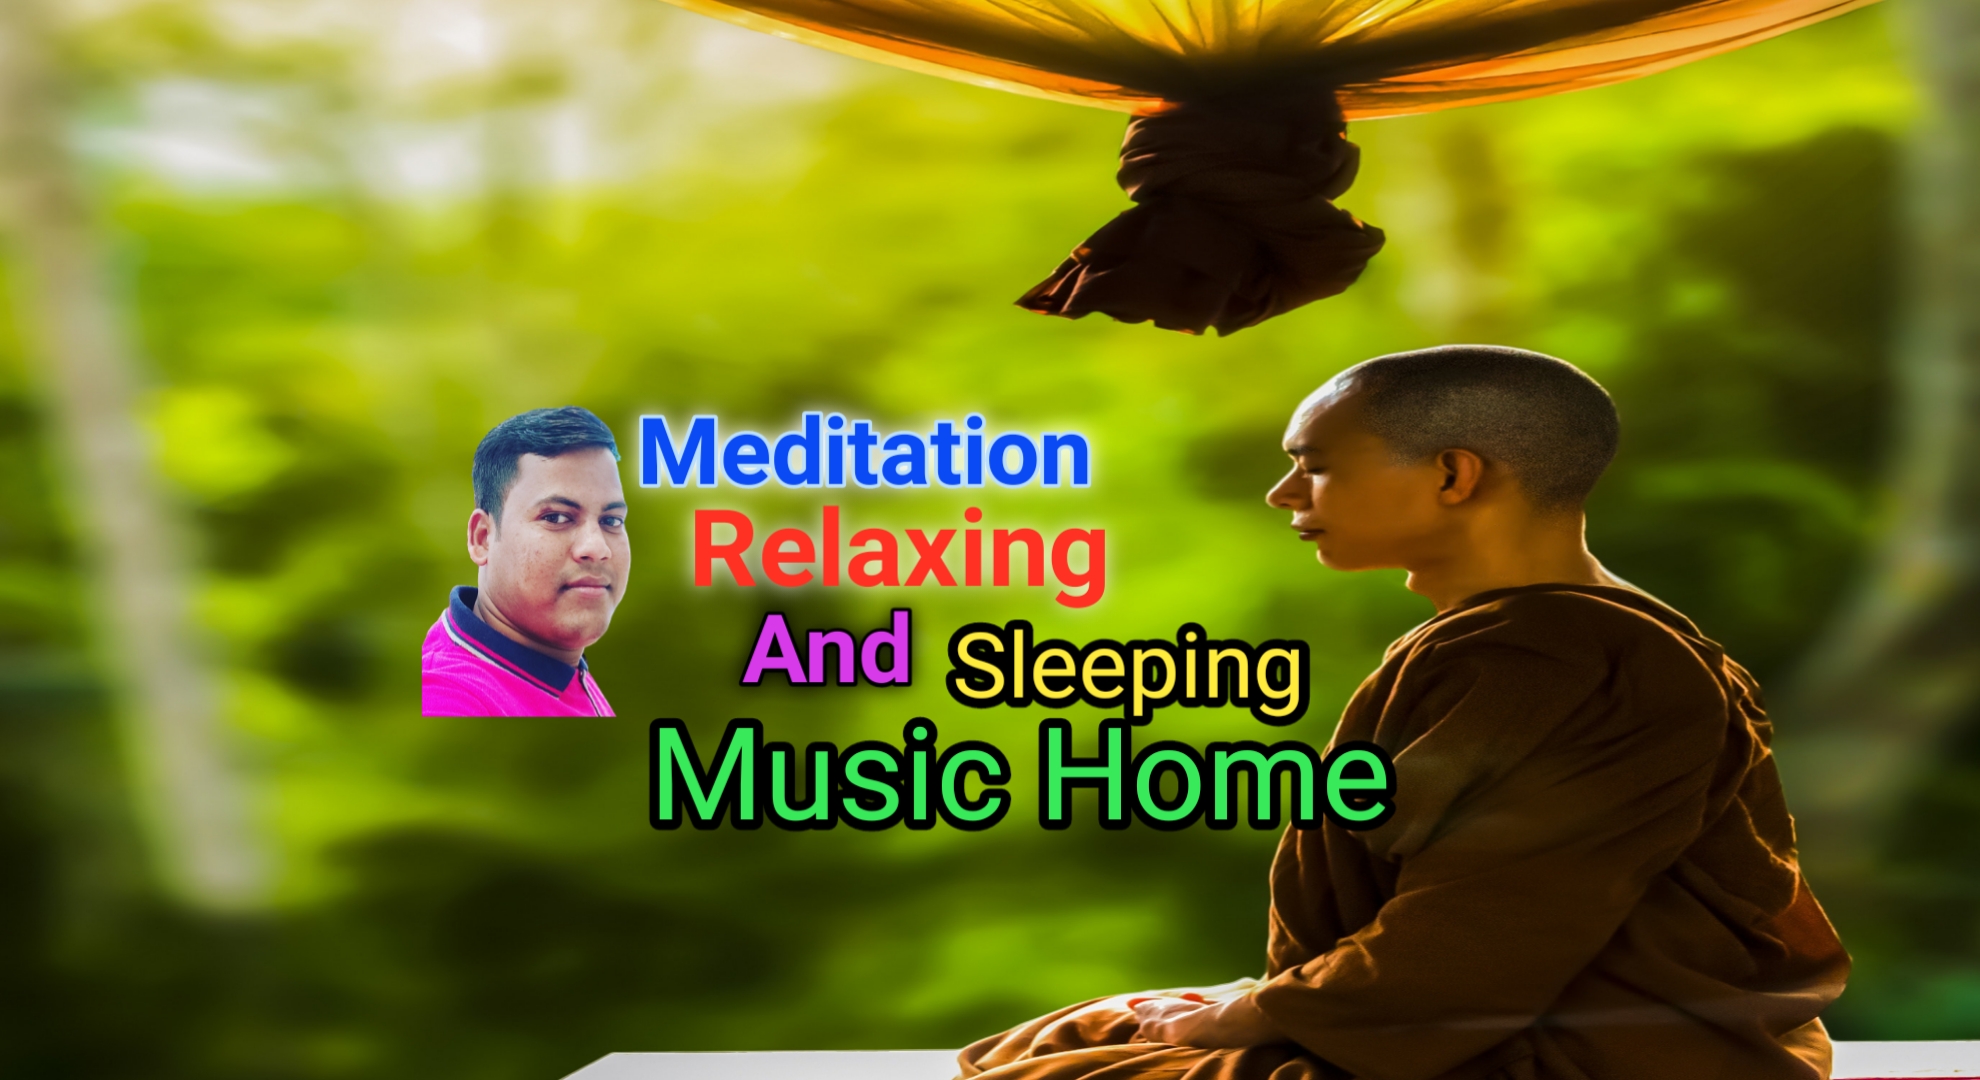 Meditation Relaxing And Sleeping Music Home